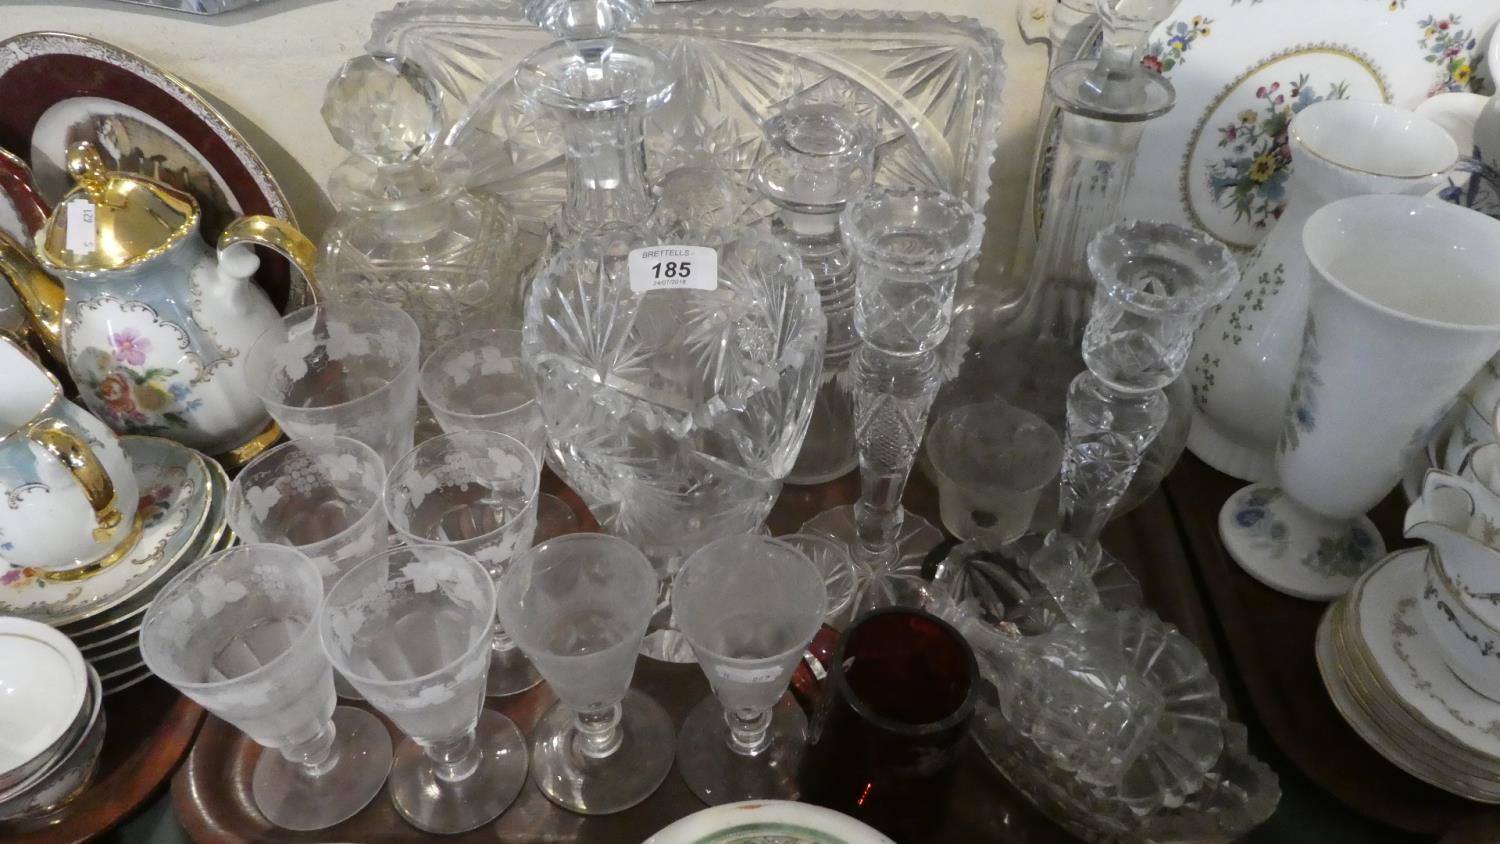 A Tray of Glassware to Include Etched Wines and Ale Glasses, Cut Glass Candle Sticks, Four Candle